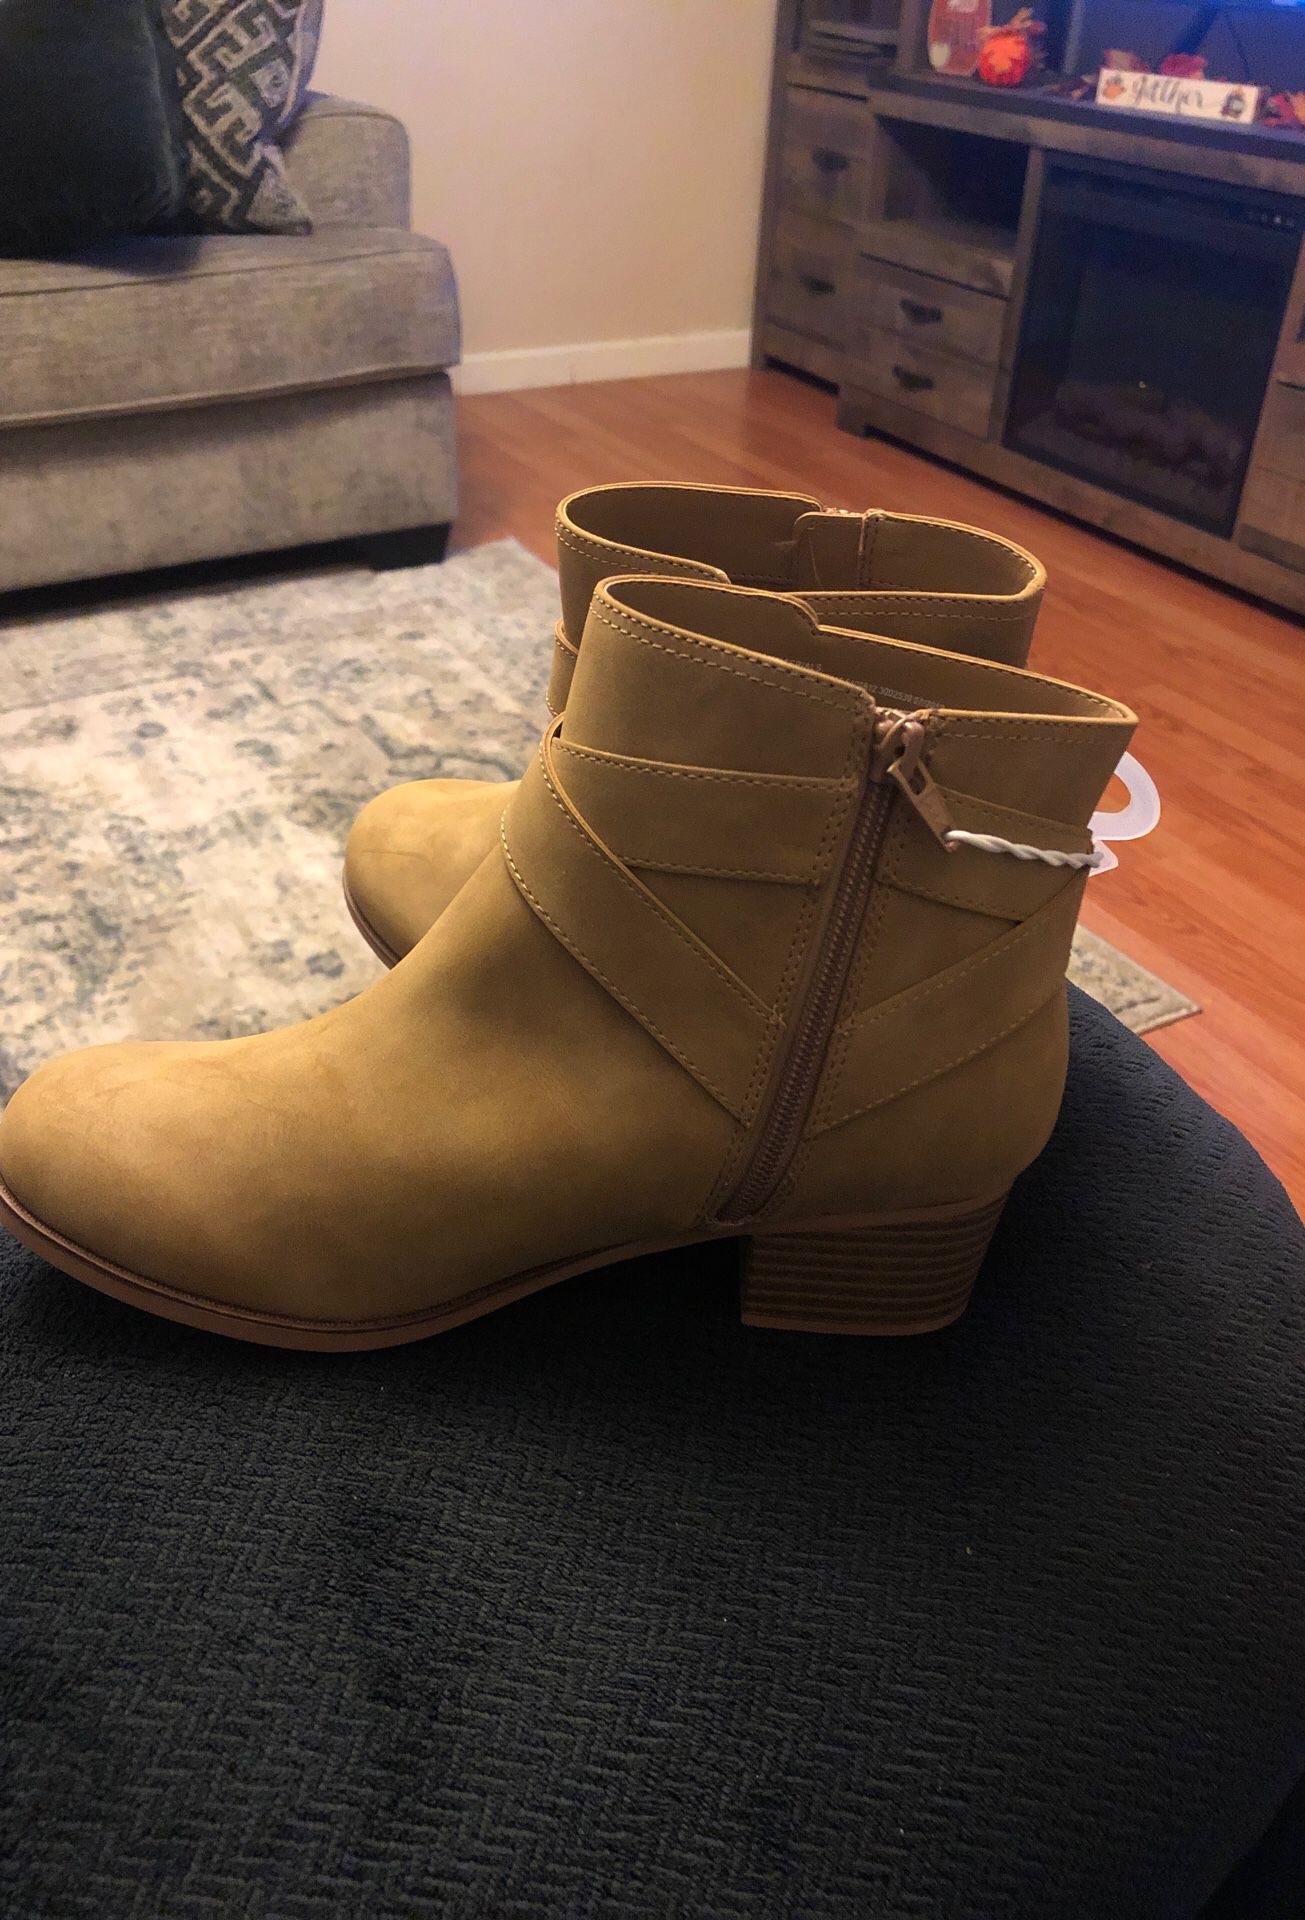 Brand new girls boots size 6